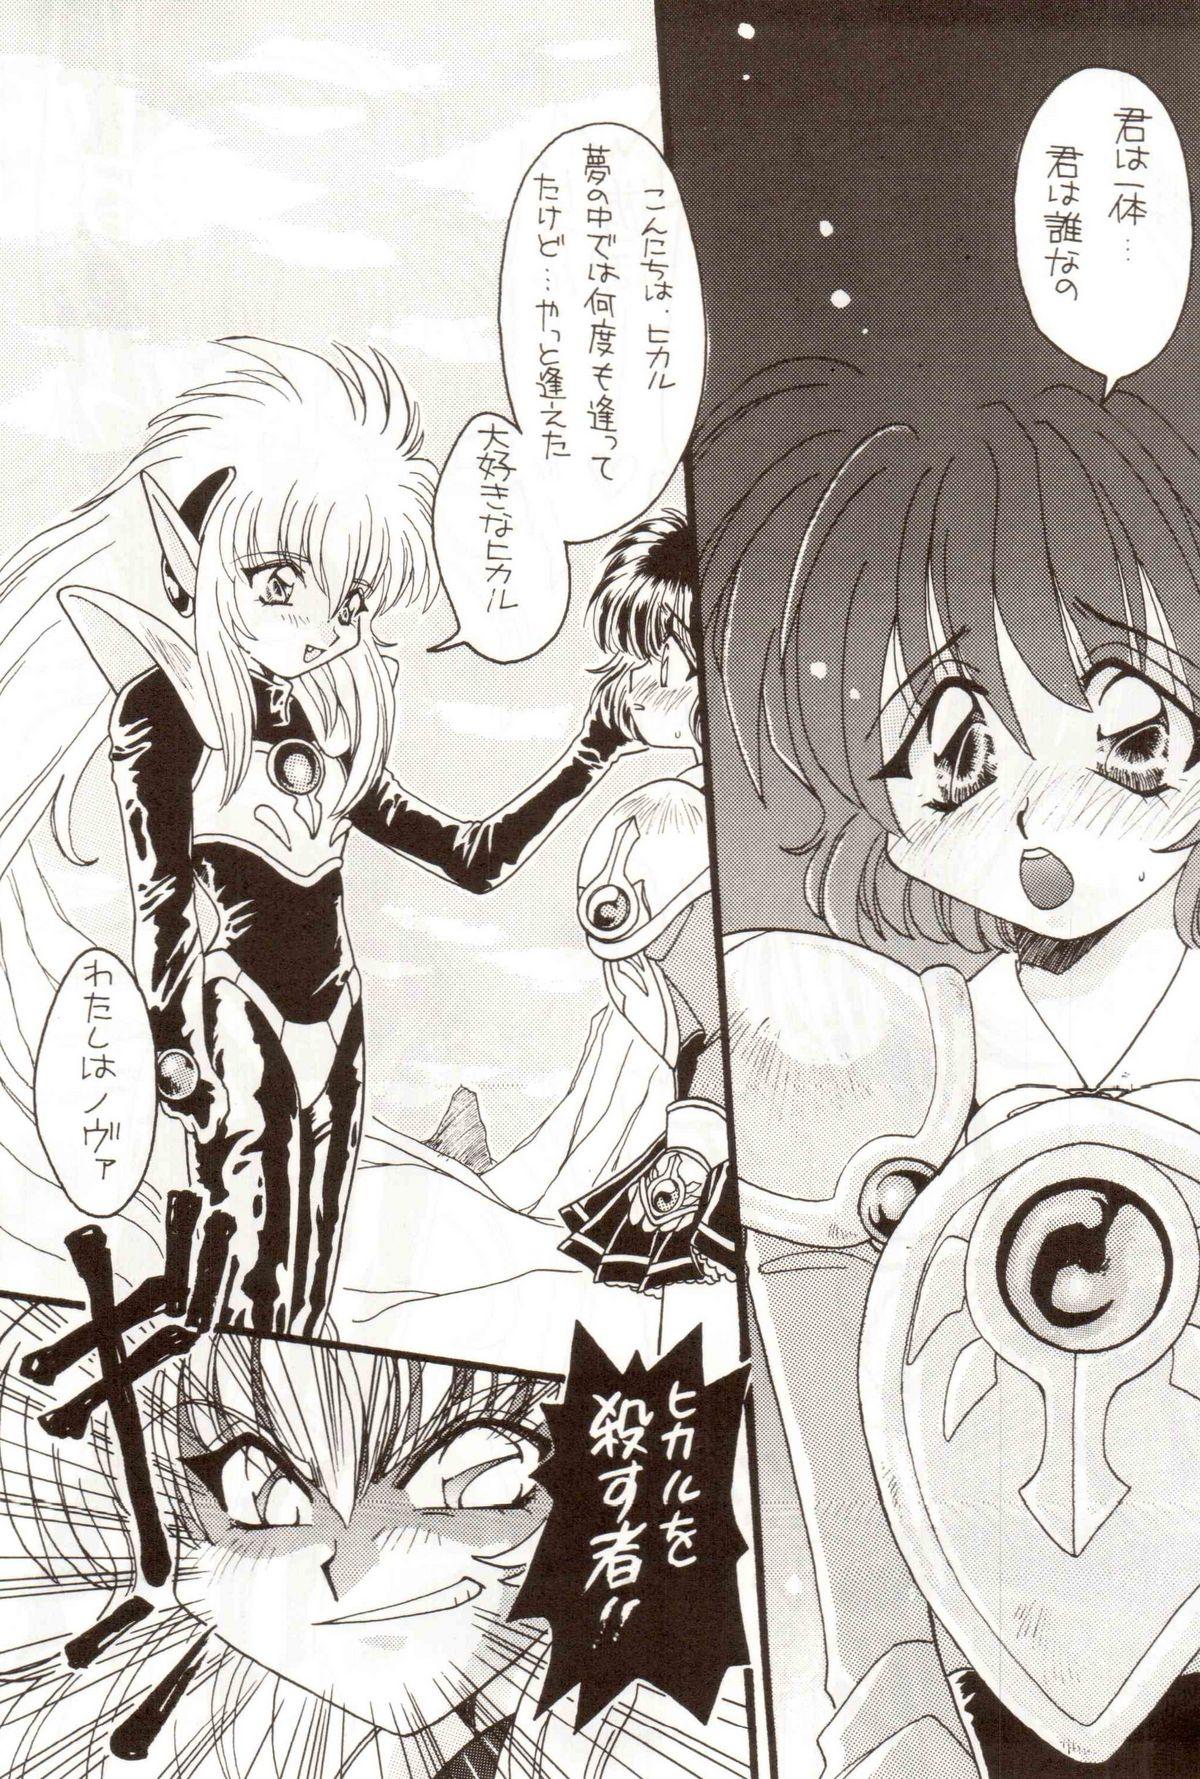 Morena Bakuhatsu On Parade - Magic knight rayearth Officesex - Page 6